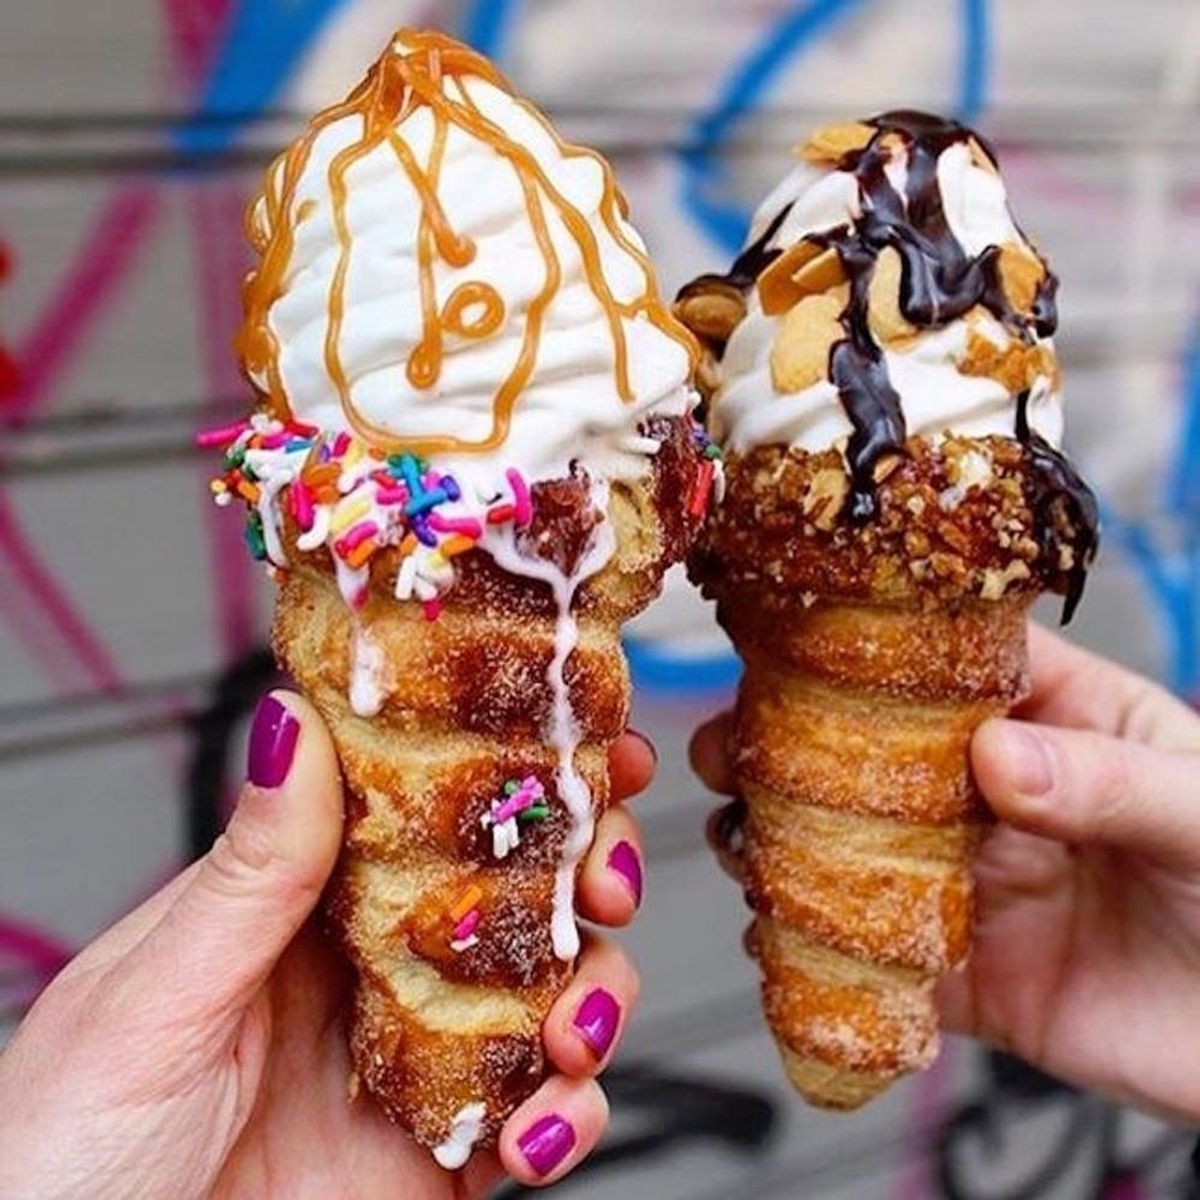 Gourmet Churros Are Going to Be Your Next Instagram Obsession